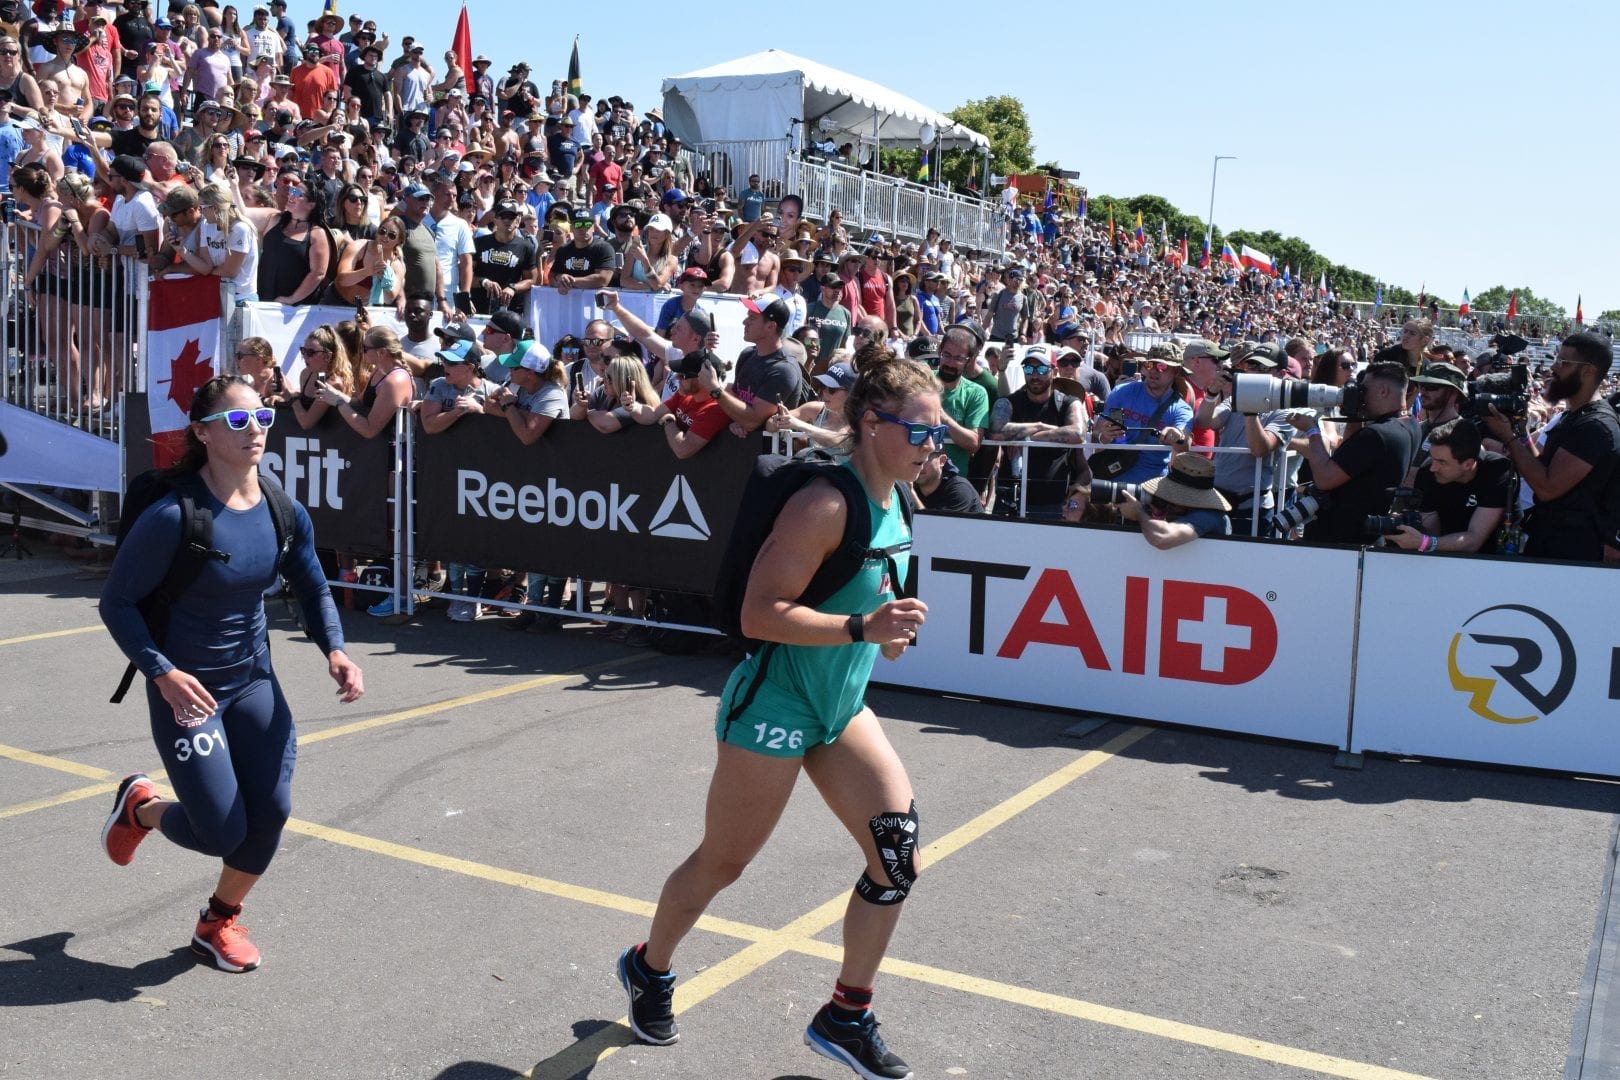 Bethany Shadburne completes the Ruck Run event at the 2019 CrossFit Games.